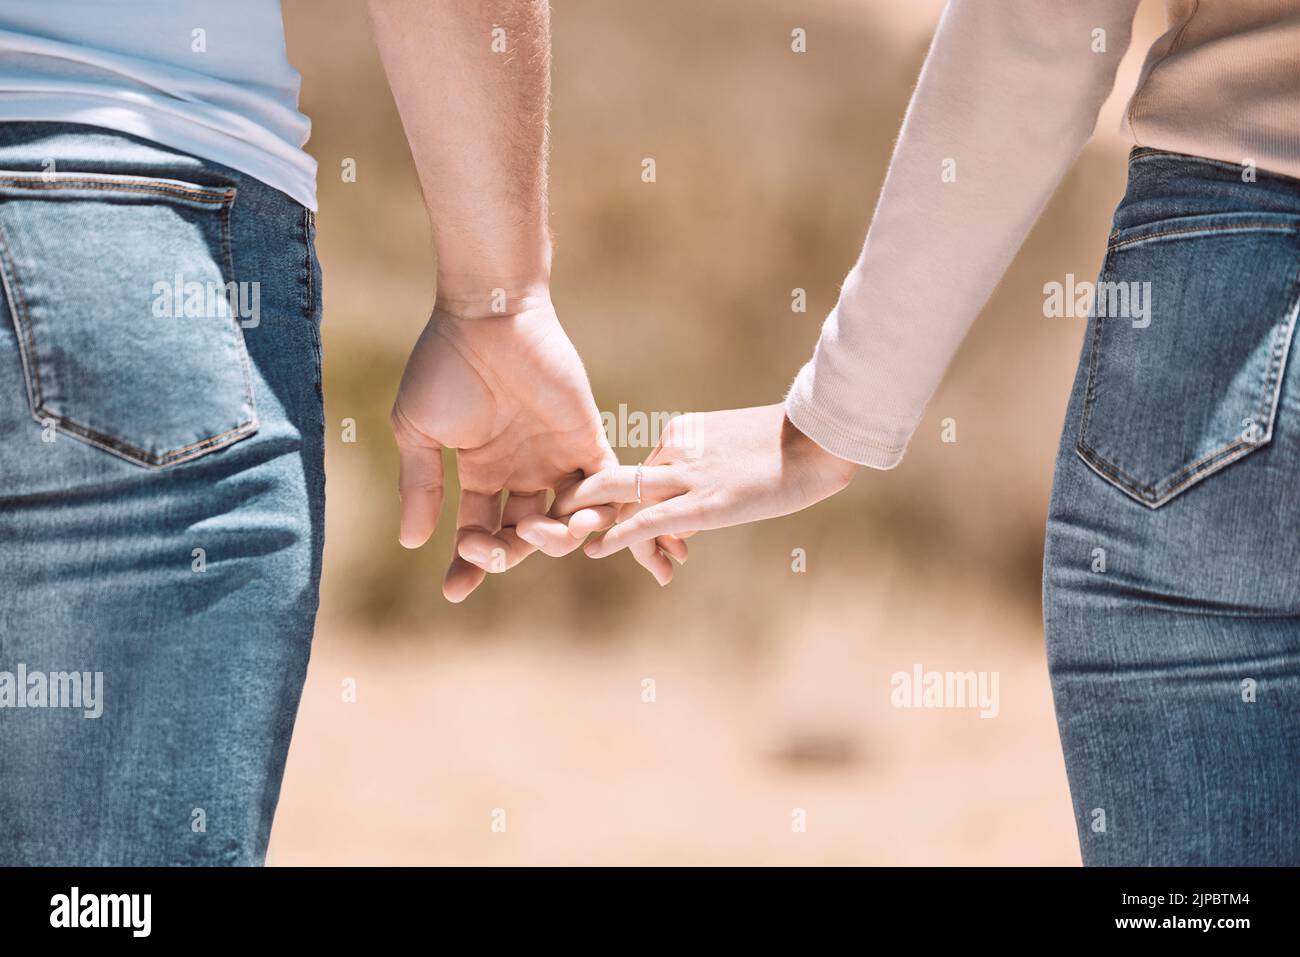 Affectionate couple holding hands showing love, caring and bonding outside together in nature. Loving boyfriend and girlfriend expressing unity Stock Photo